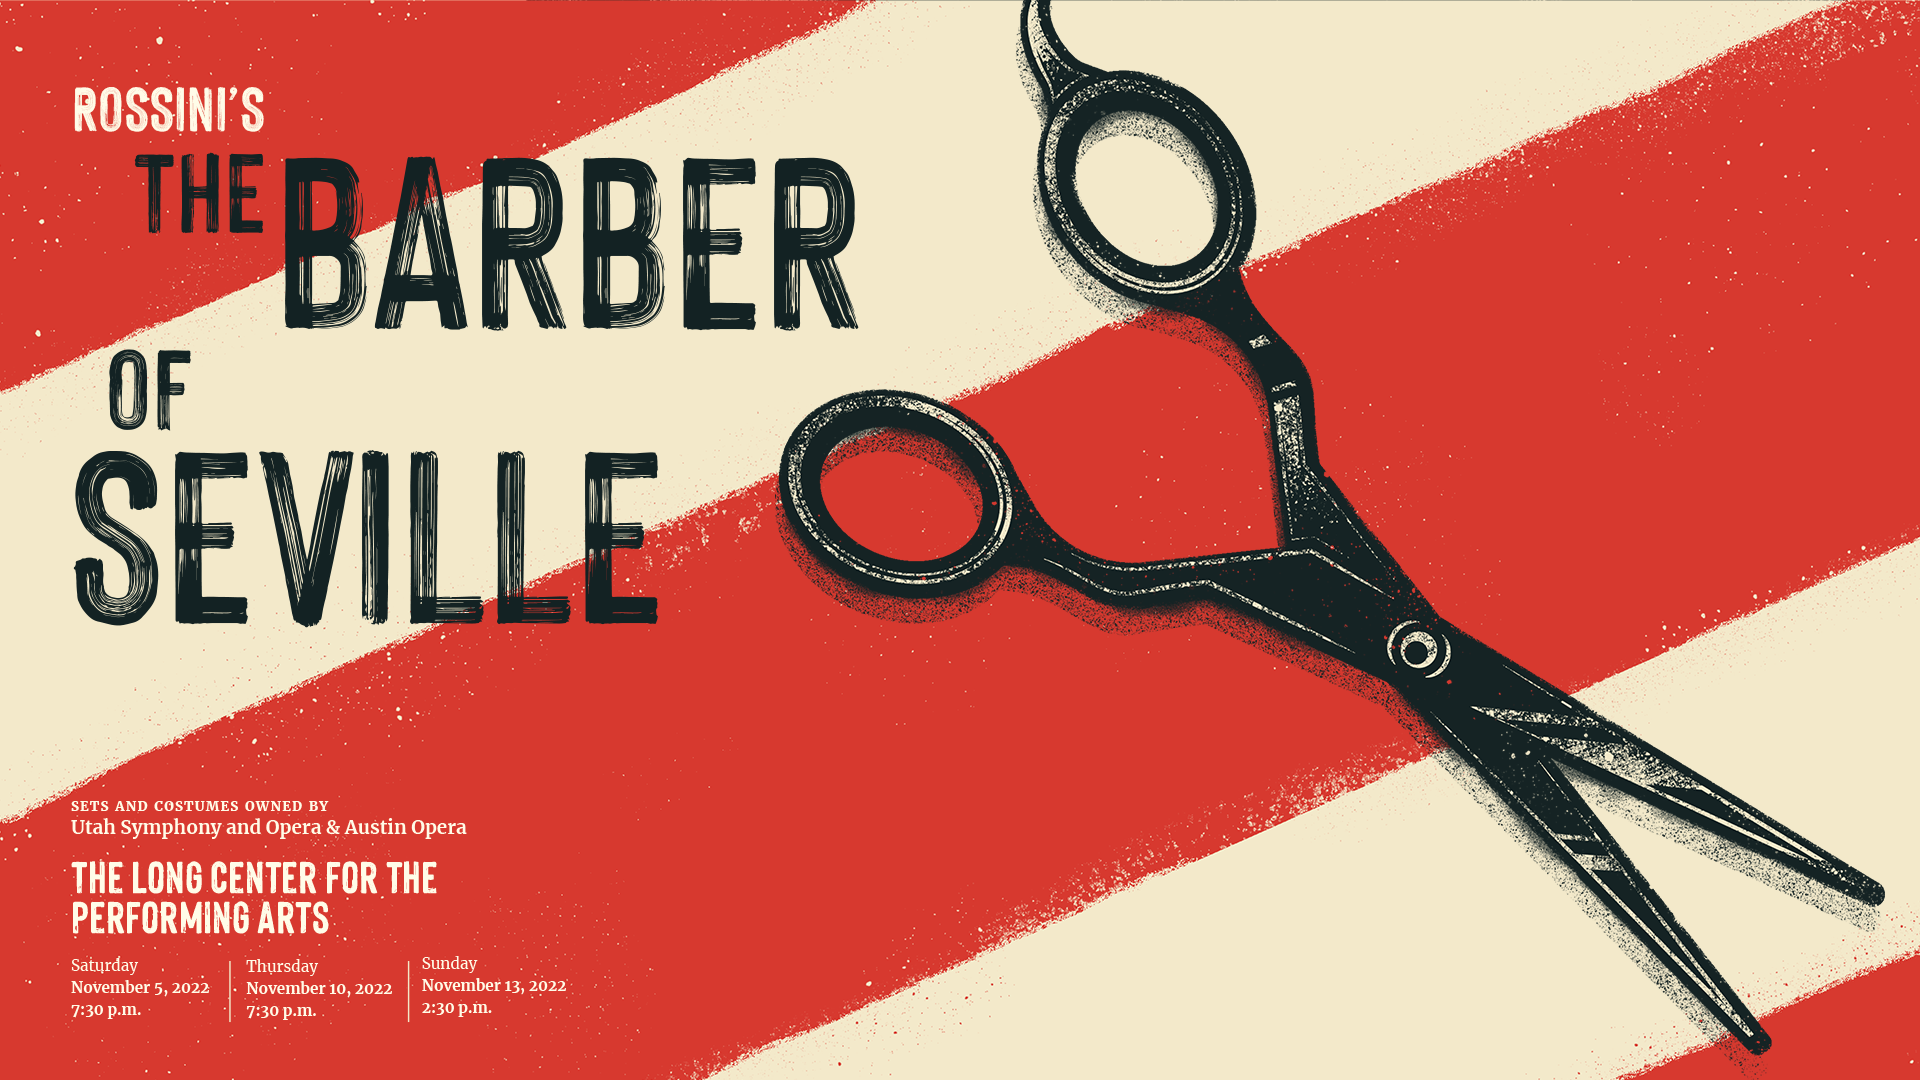 💈 Haircut & Ear Hair Singeing With The Brazilian Barber of Seville